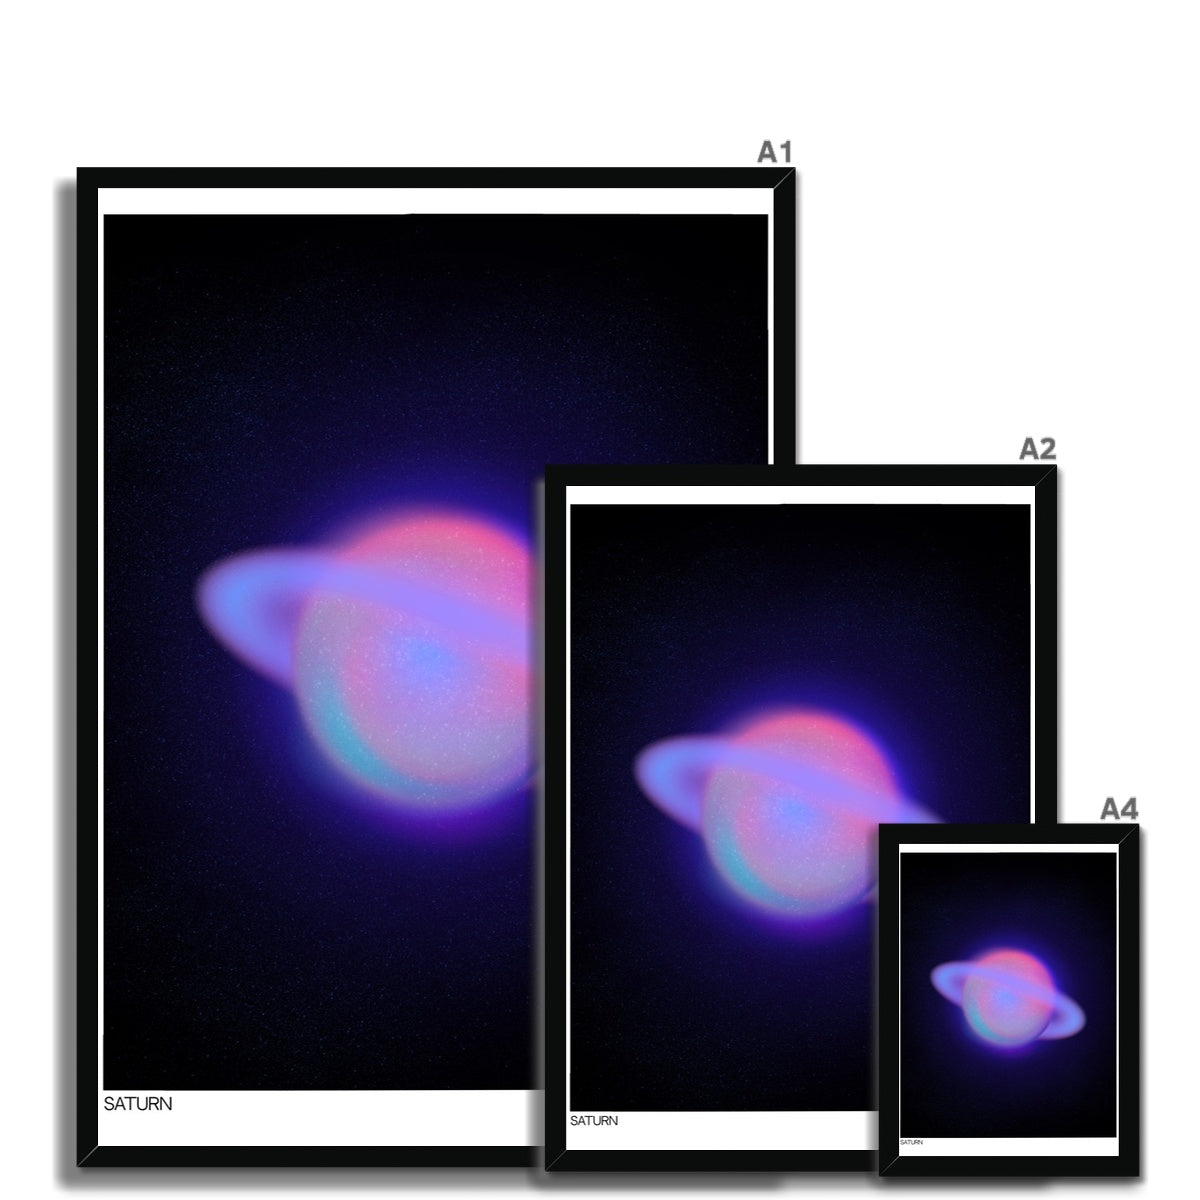 Cosmic aura wall art prints inspired from the sun, moon and stars. Abstract aura posters with dreamy gradients that make a stellar addition to any space.